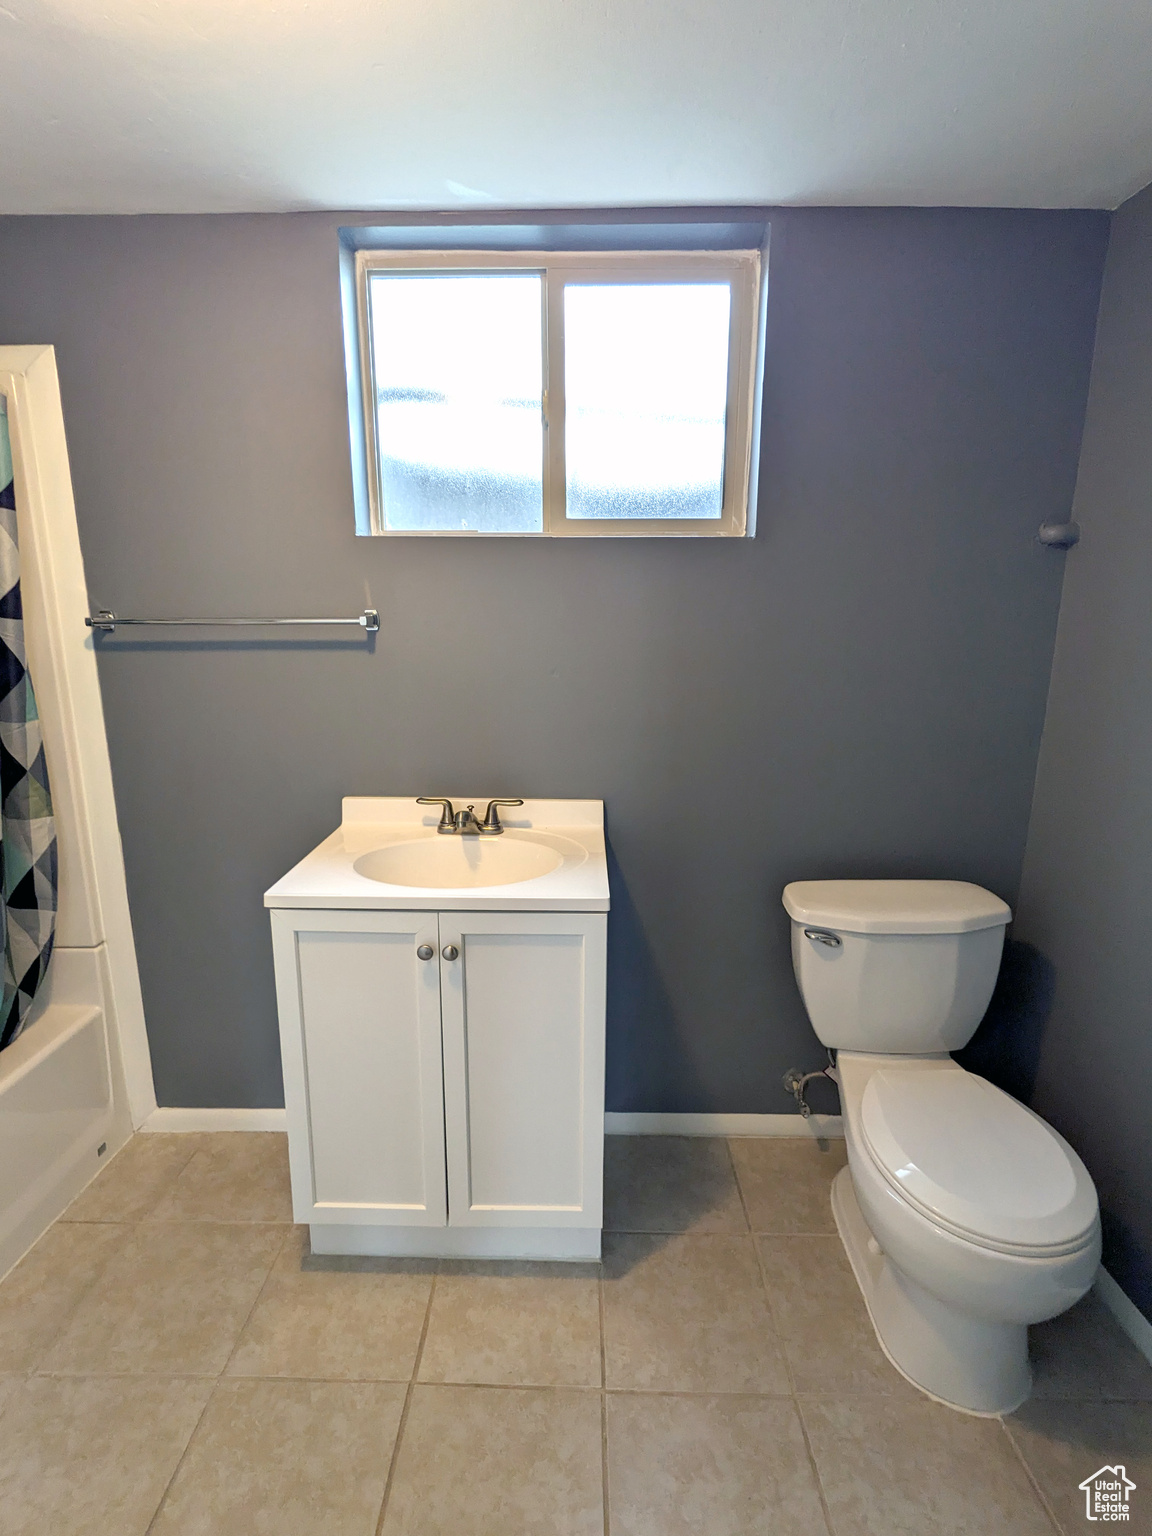 Full bathroom with shower / bathtub combination with curtain, toilet, tile floors, and vanity